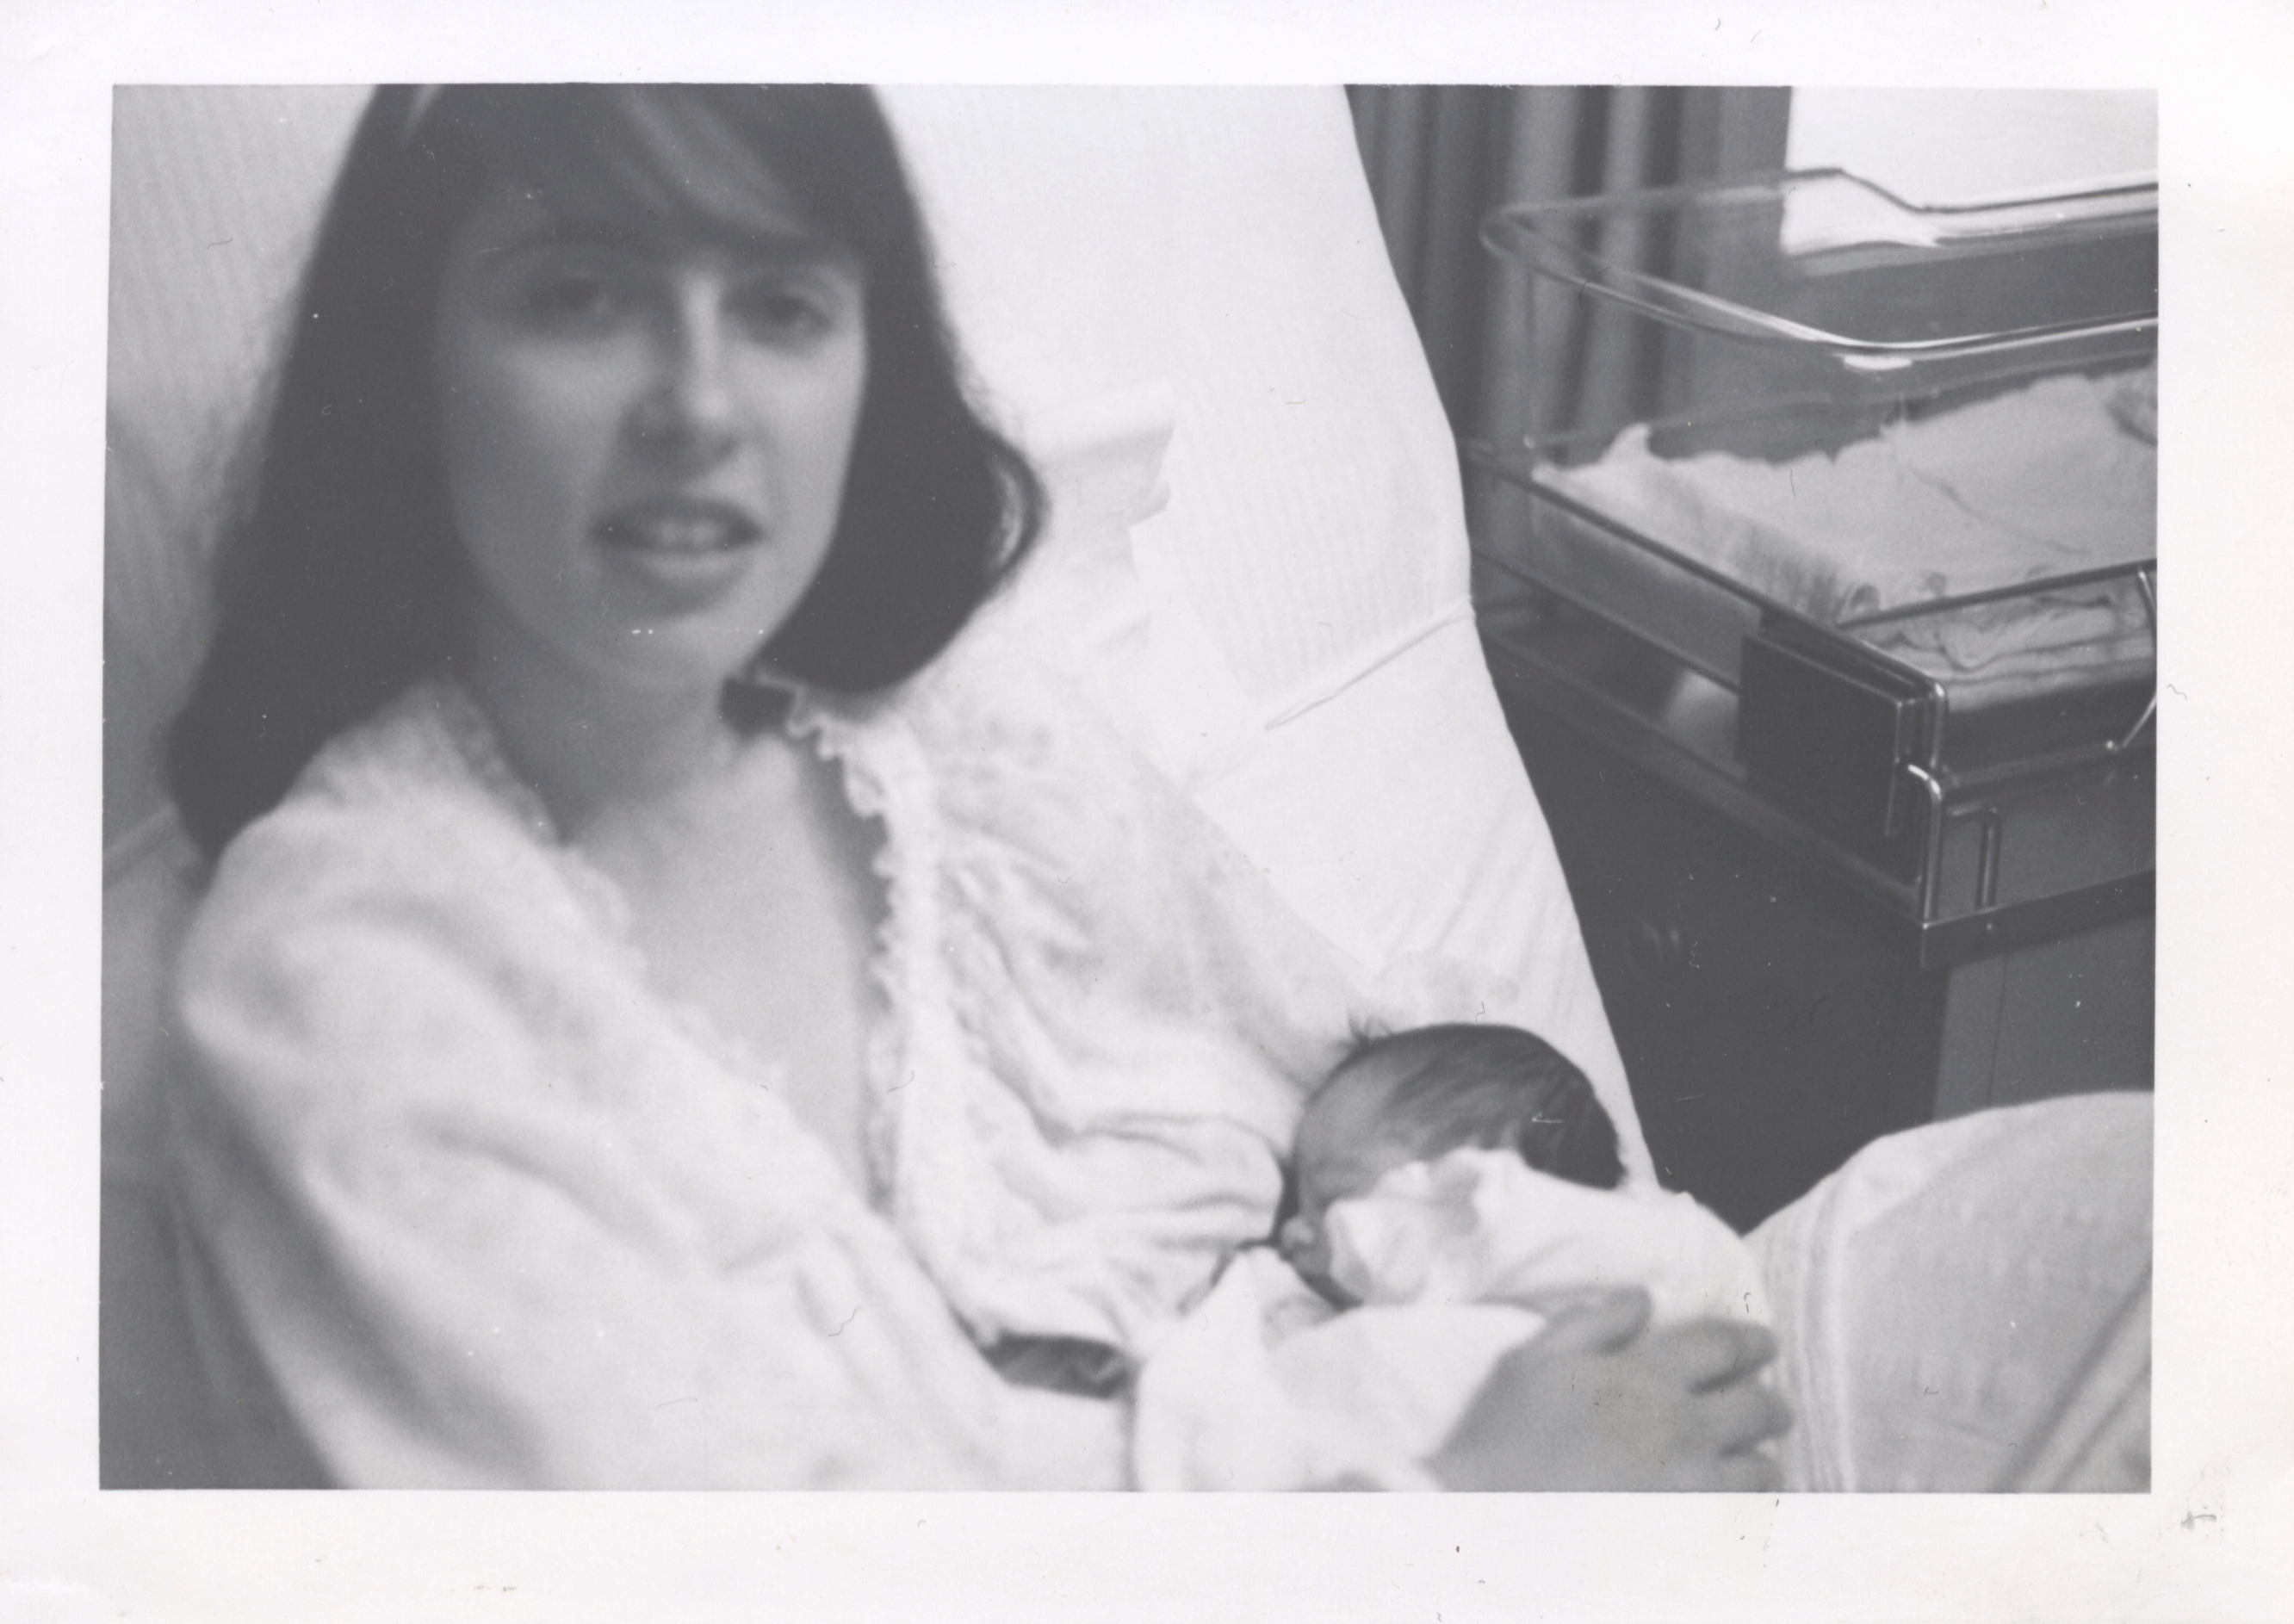 The day Lenora was born, May 17, 1963